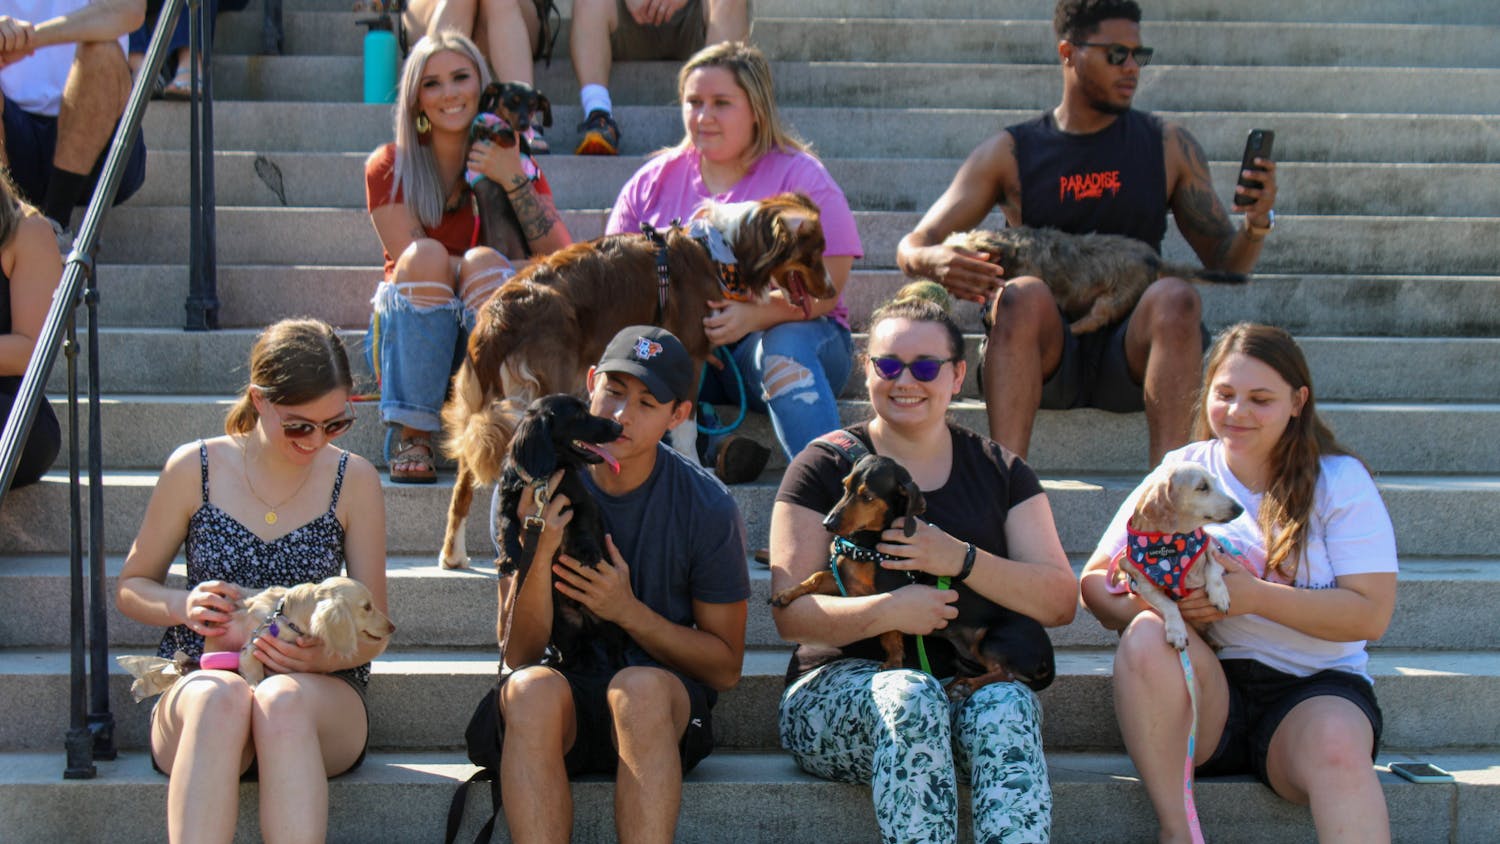 The Dachshunds of Columbia dog walking group gathers along the steps of the Statehouse with their dogs for a group picture on Sept. 17, 2022. The Columbia dog-walking group gathered with their furry friends for a walk from USC's Horseshoe to the S.C. Statehouse.